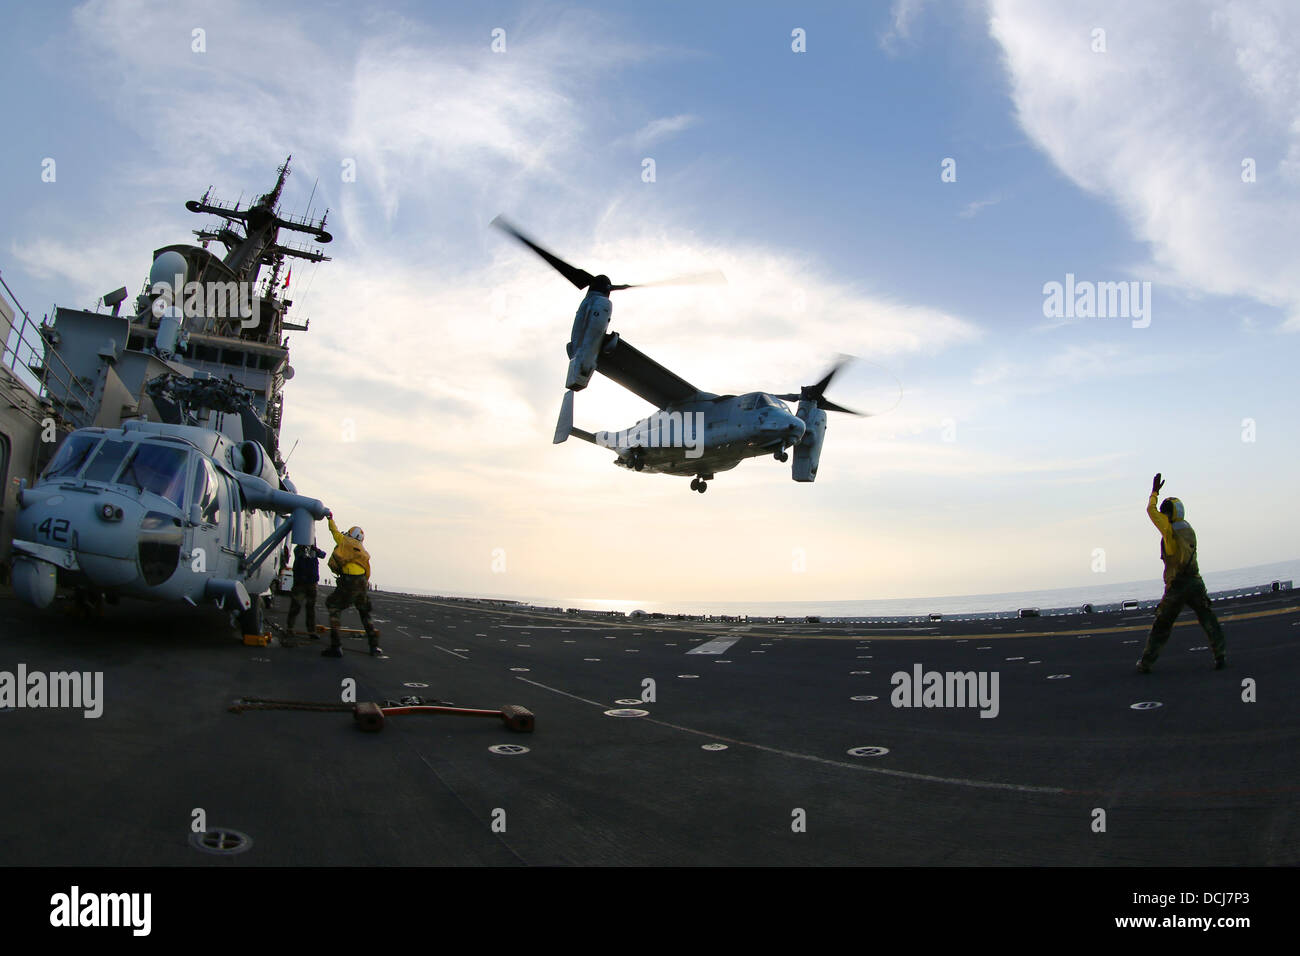 An MV-22 Osprey takes off from the flight deck of the amphibious assault ship USS Kearsarge (LHD 3). Kearsarge is the flagship for the Kearsarge Amphibious Ready Group and, with the embarked 26th Marine Expeditionary Unit, is deployed in support of mariti Stock Photo